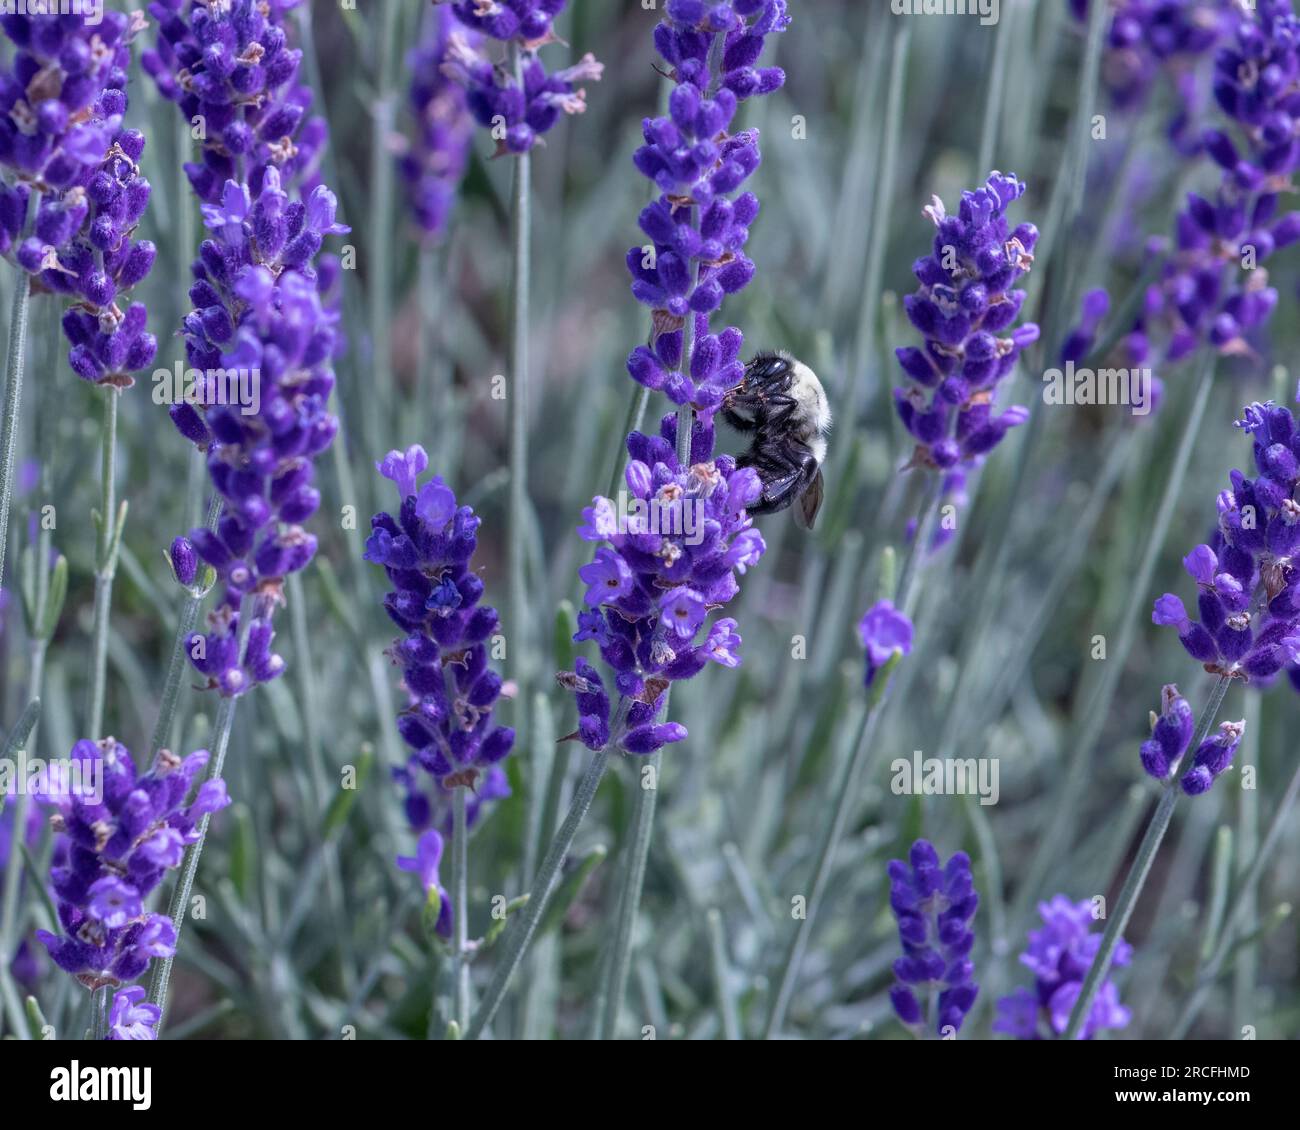 closeup of a honey bumblebee showing its face and legs as it gathers pollen among lavender flowers. Stock Photo